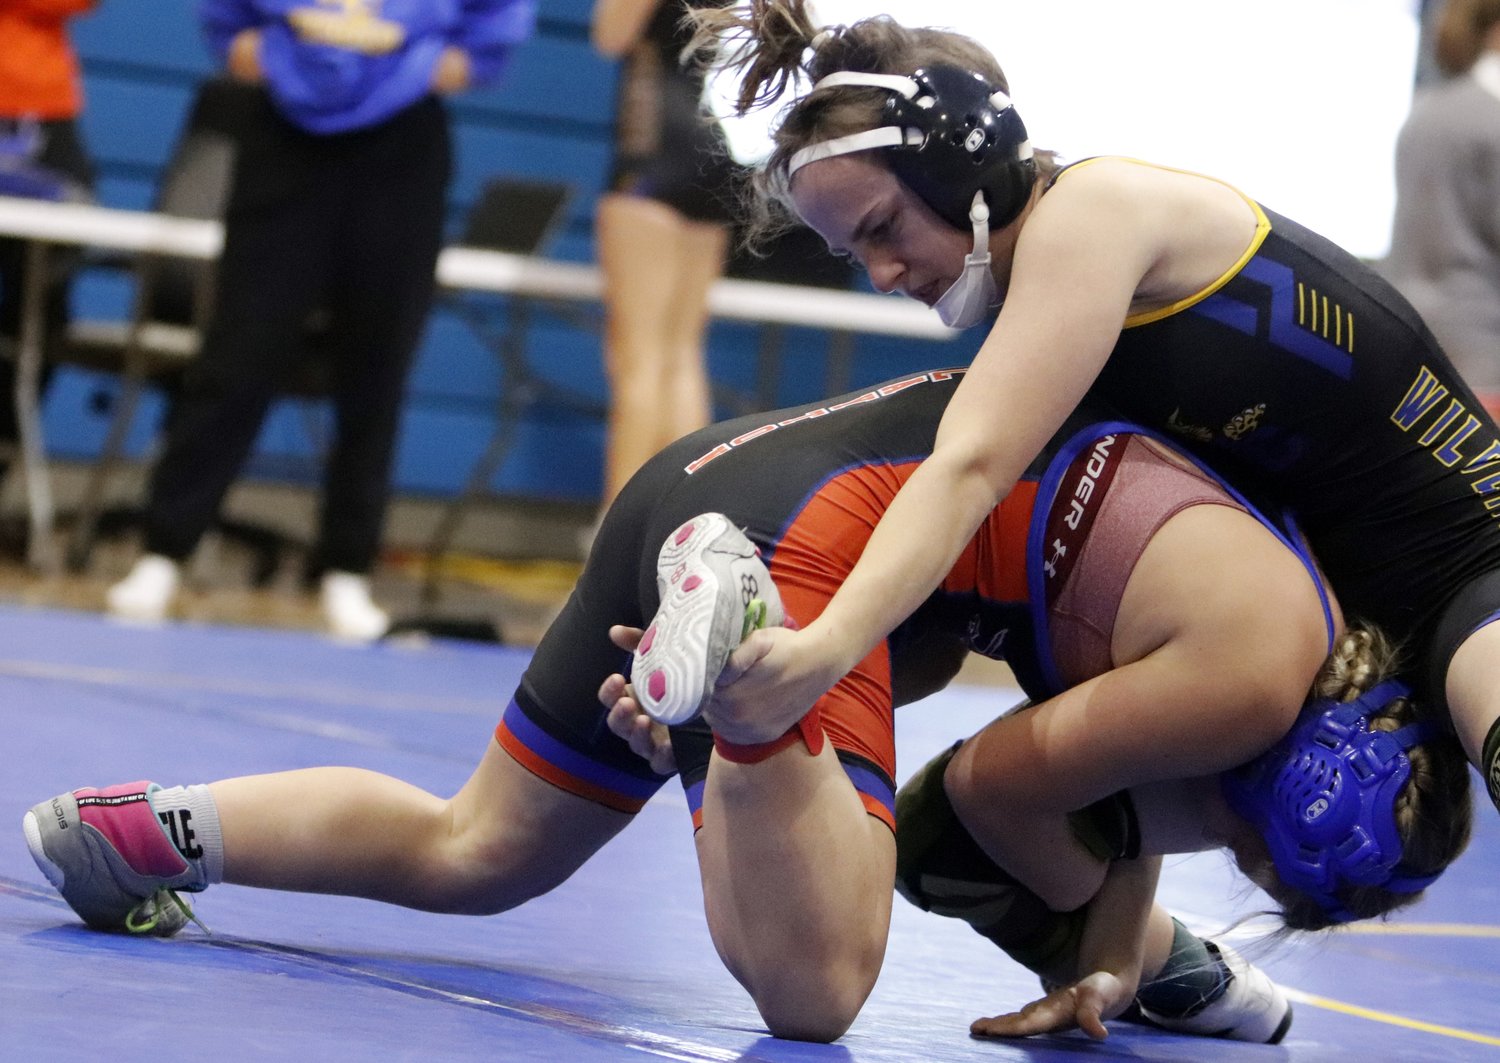 Kali Jensen (right) competes at the Wright City Invite earlier this season. Jensen finished first place in the 115-pound weight class at the St. Clair Invitational last weekend.